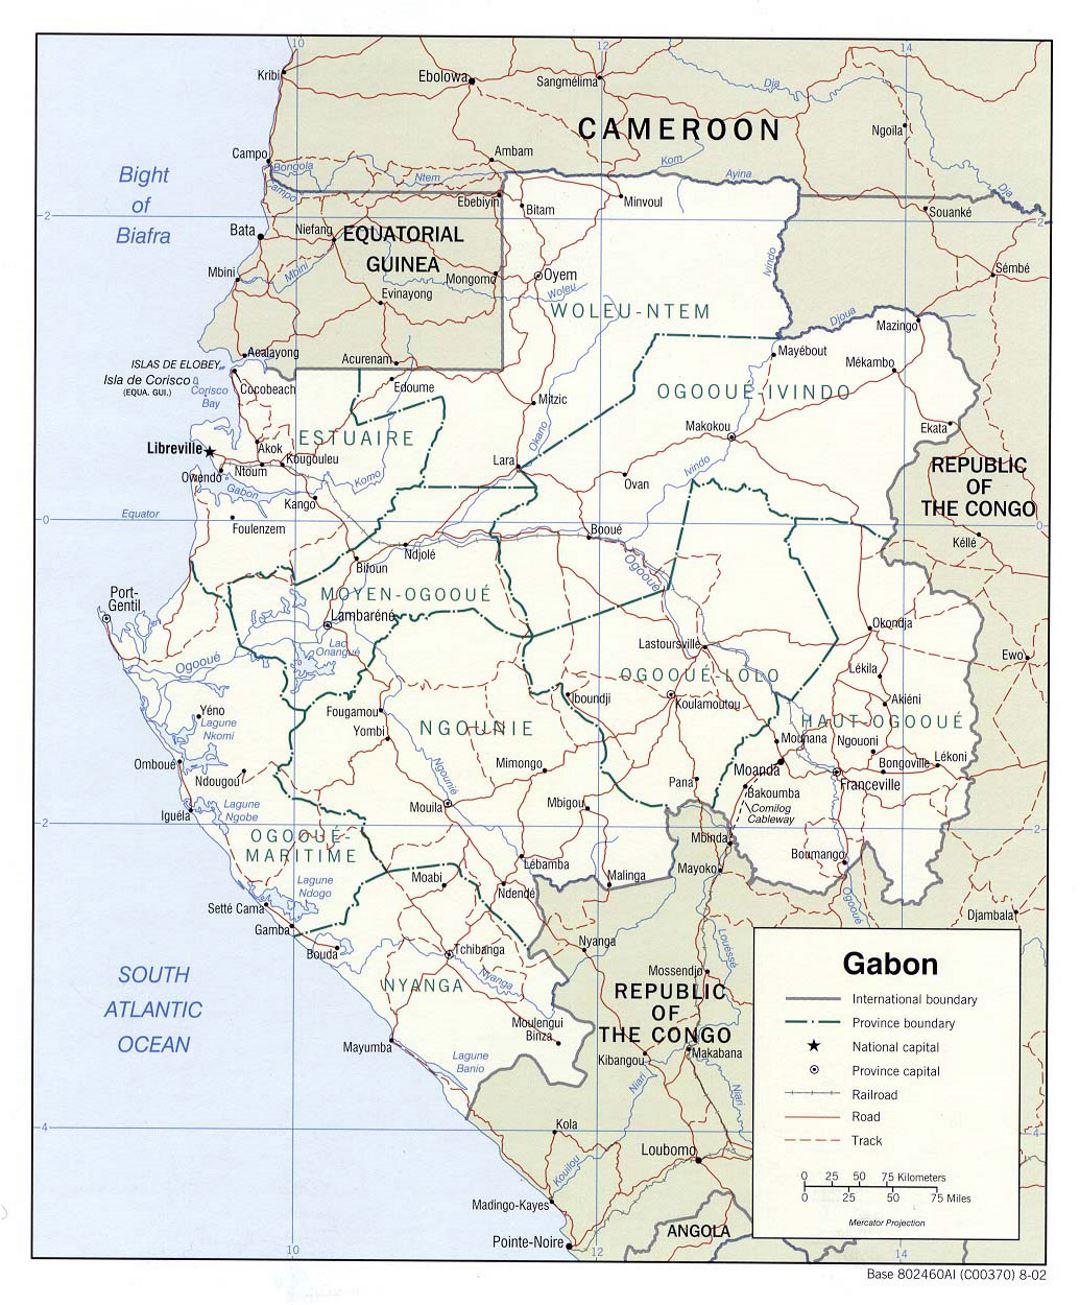 Detailed political and administrative map of Gabon with roads, railroads and major cities - 2002